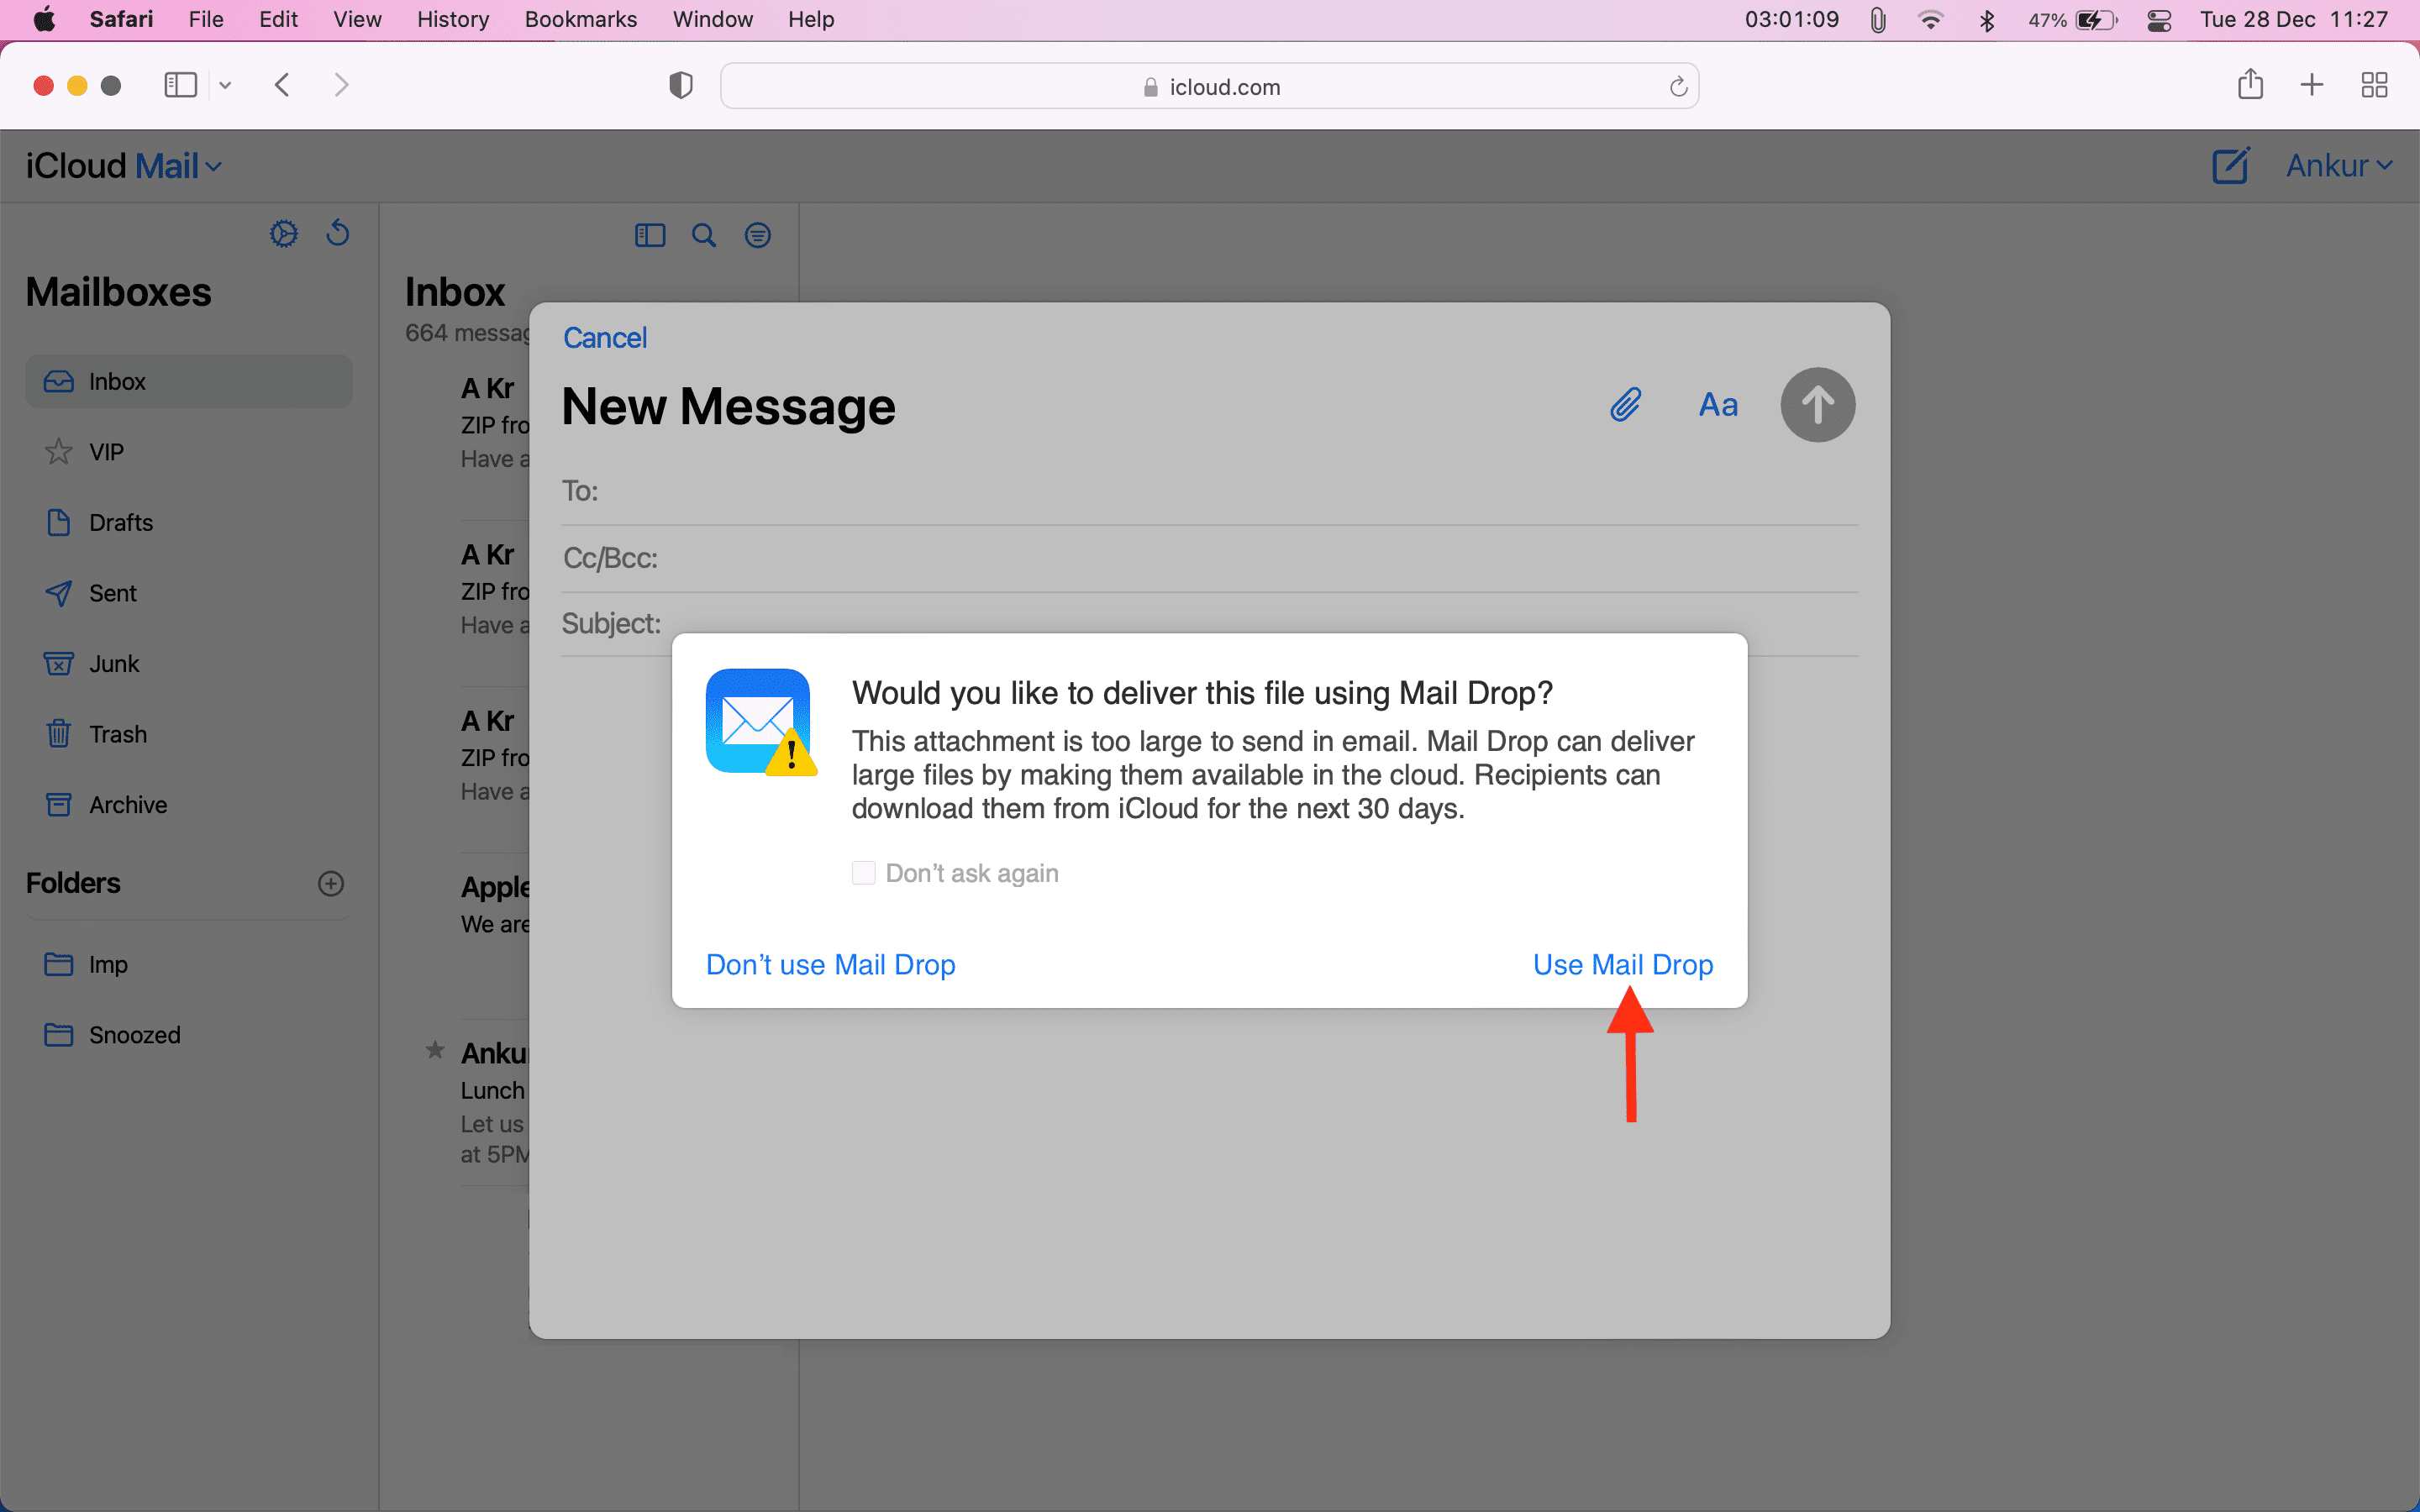 Use Mail Drop popup on Mac